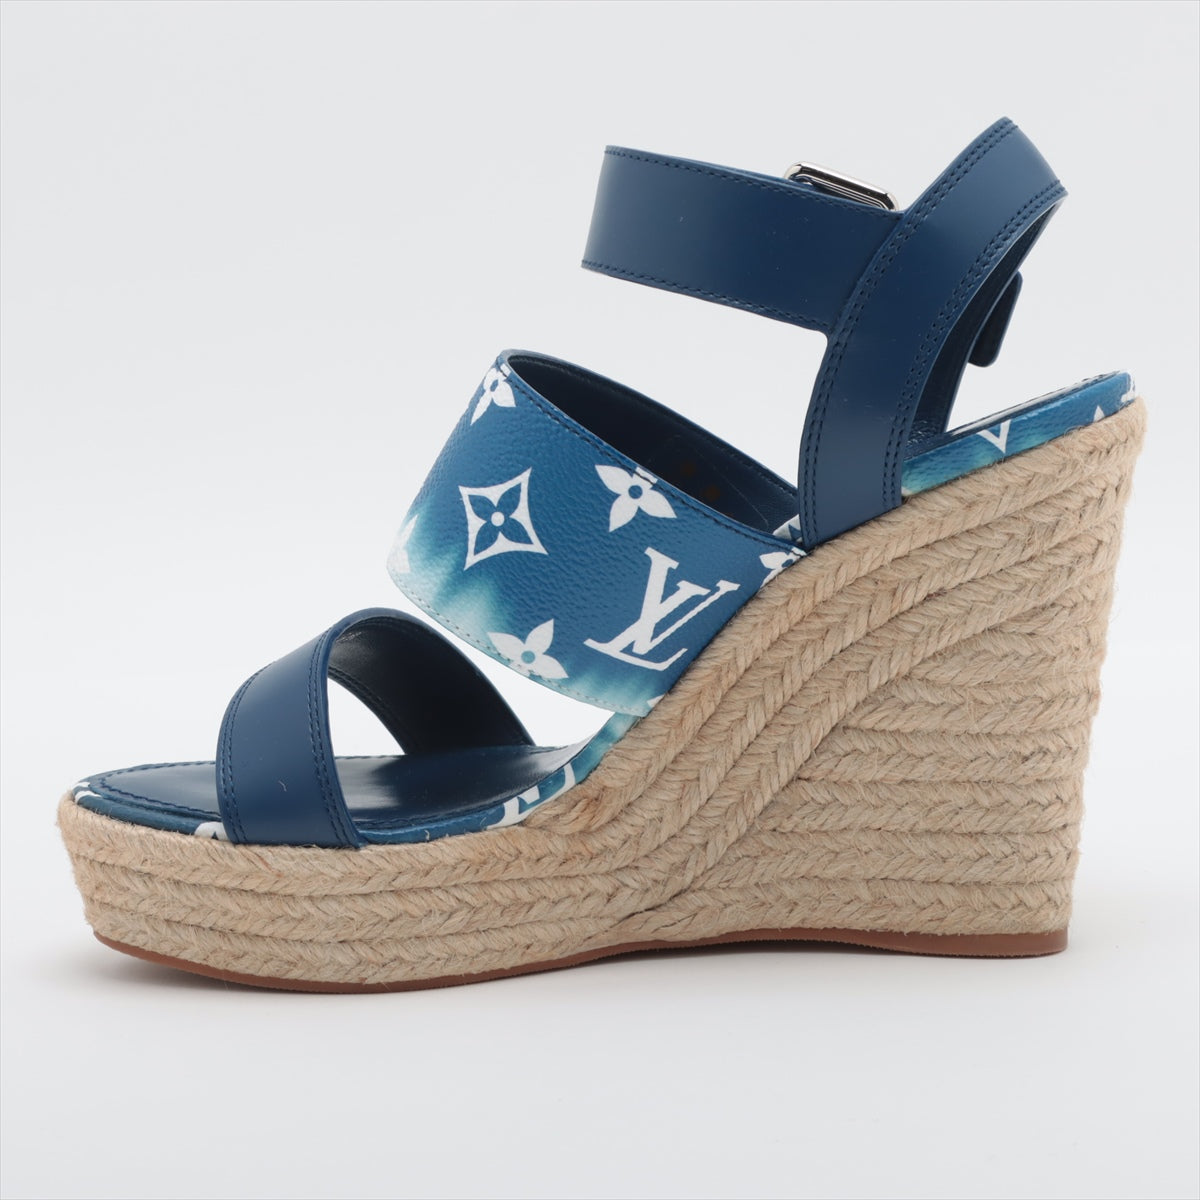 Louis Vuitton Starboard line 20 years PVC & leather Wedge Sole Sandals 38 Ladies' Blue x white CL0210 Monogram Espadrilles There is a V mark There is a storage bag